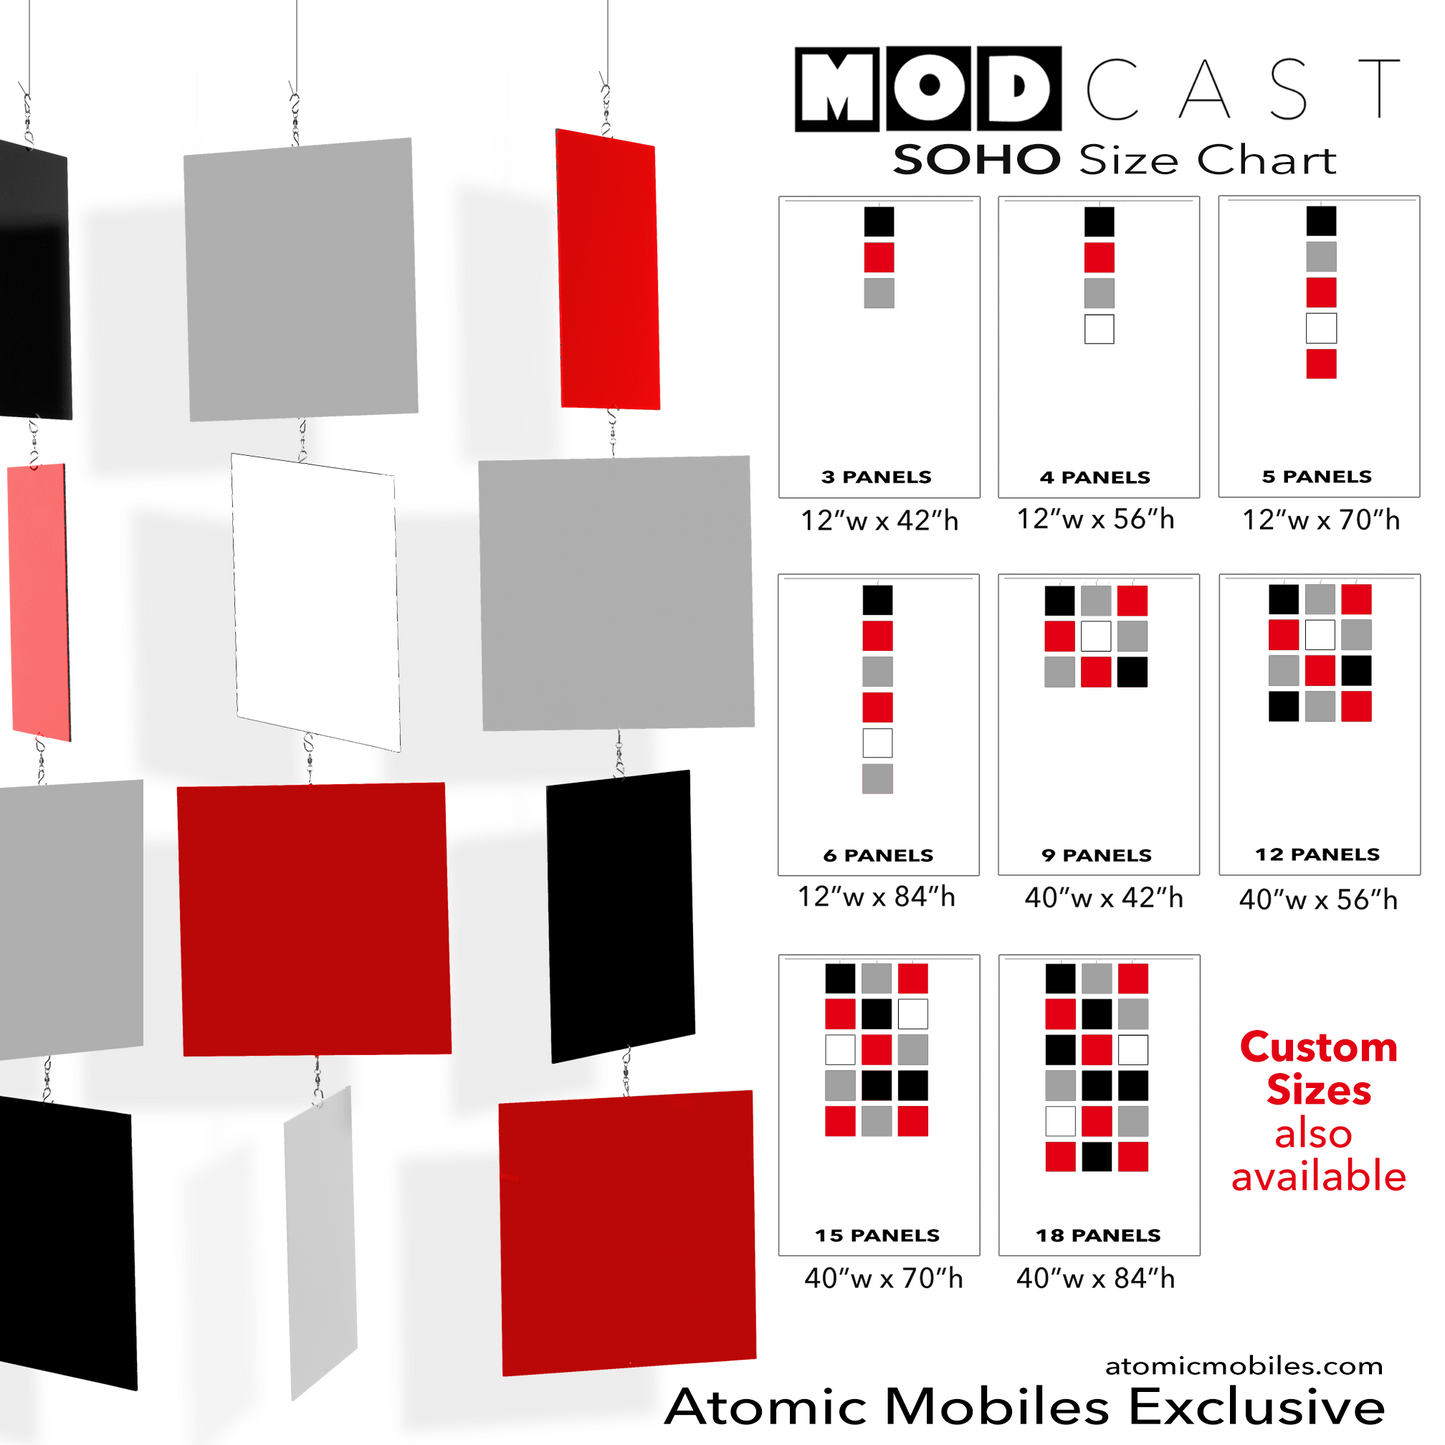 Size Chart for SOHO MODcast Hanging Art Mobiles in Black, Red, Gray, and White - mid century modern style kinetic art by AtomicMobiles.com